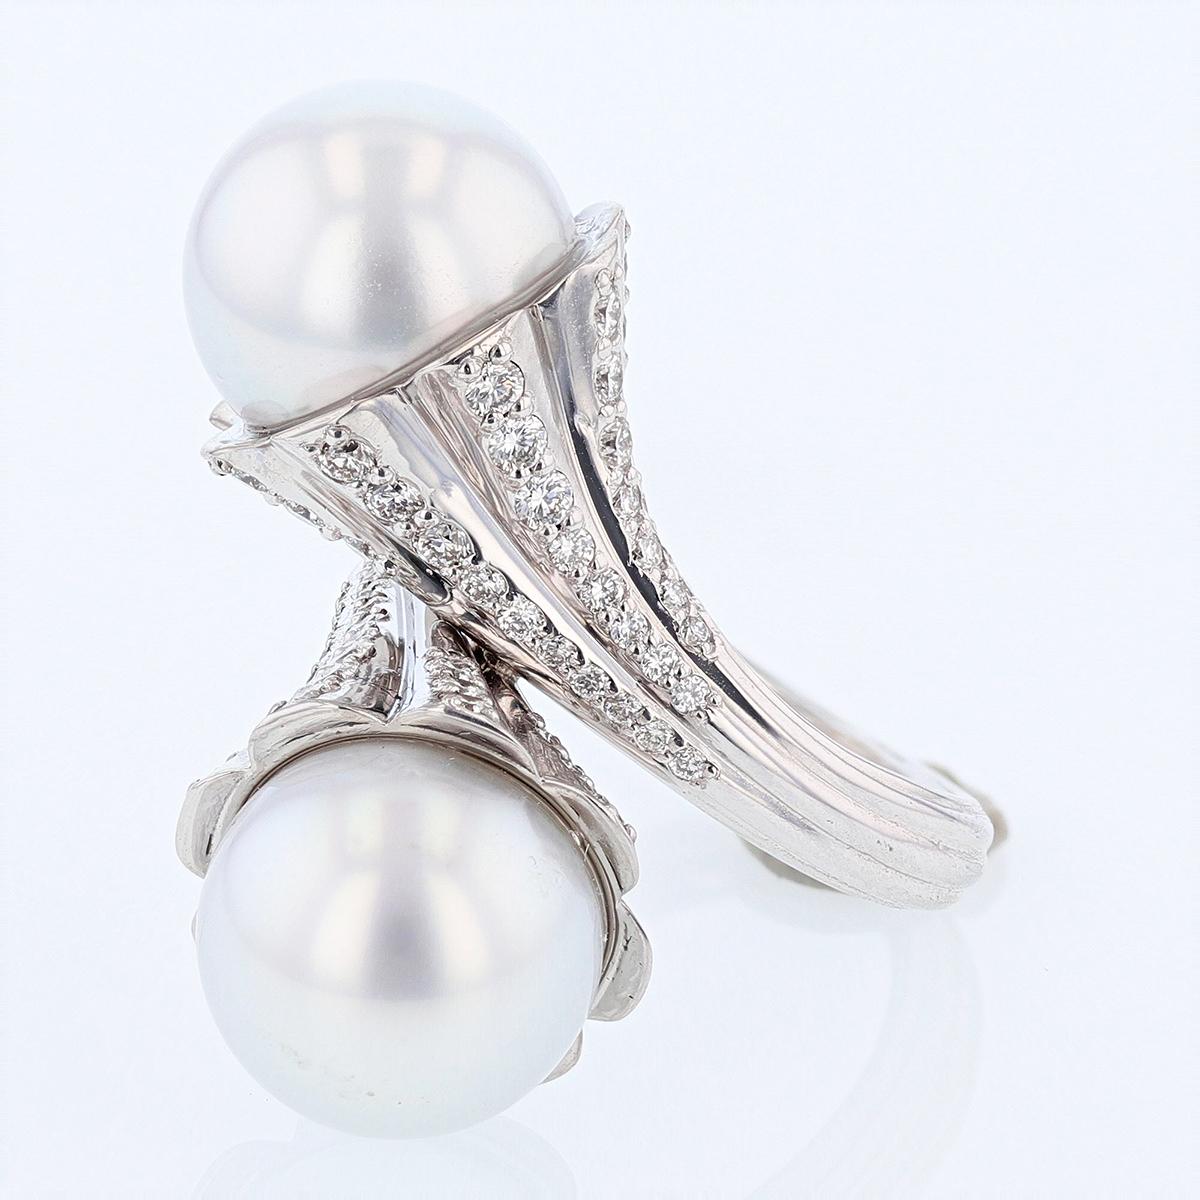 This ring is designed by Nazarelle and made in 14k white gold. The ring features two 12.8mm South Sea Pearls and 76 round diamonds weighing 1.49cts.